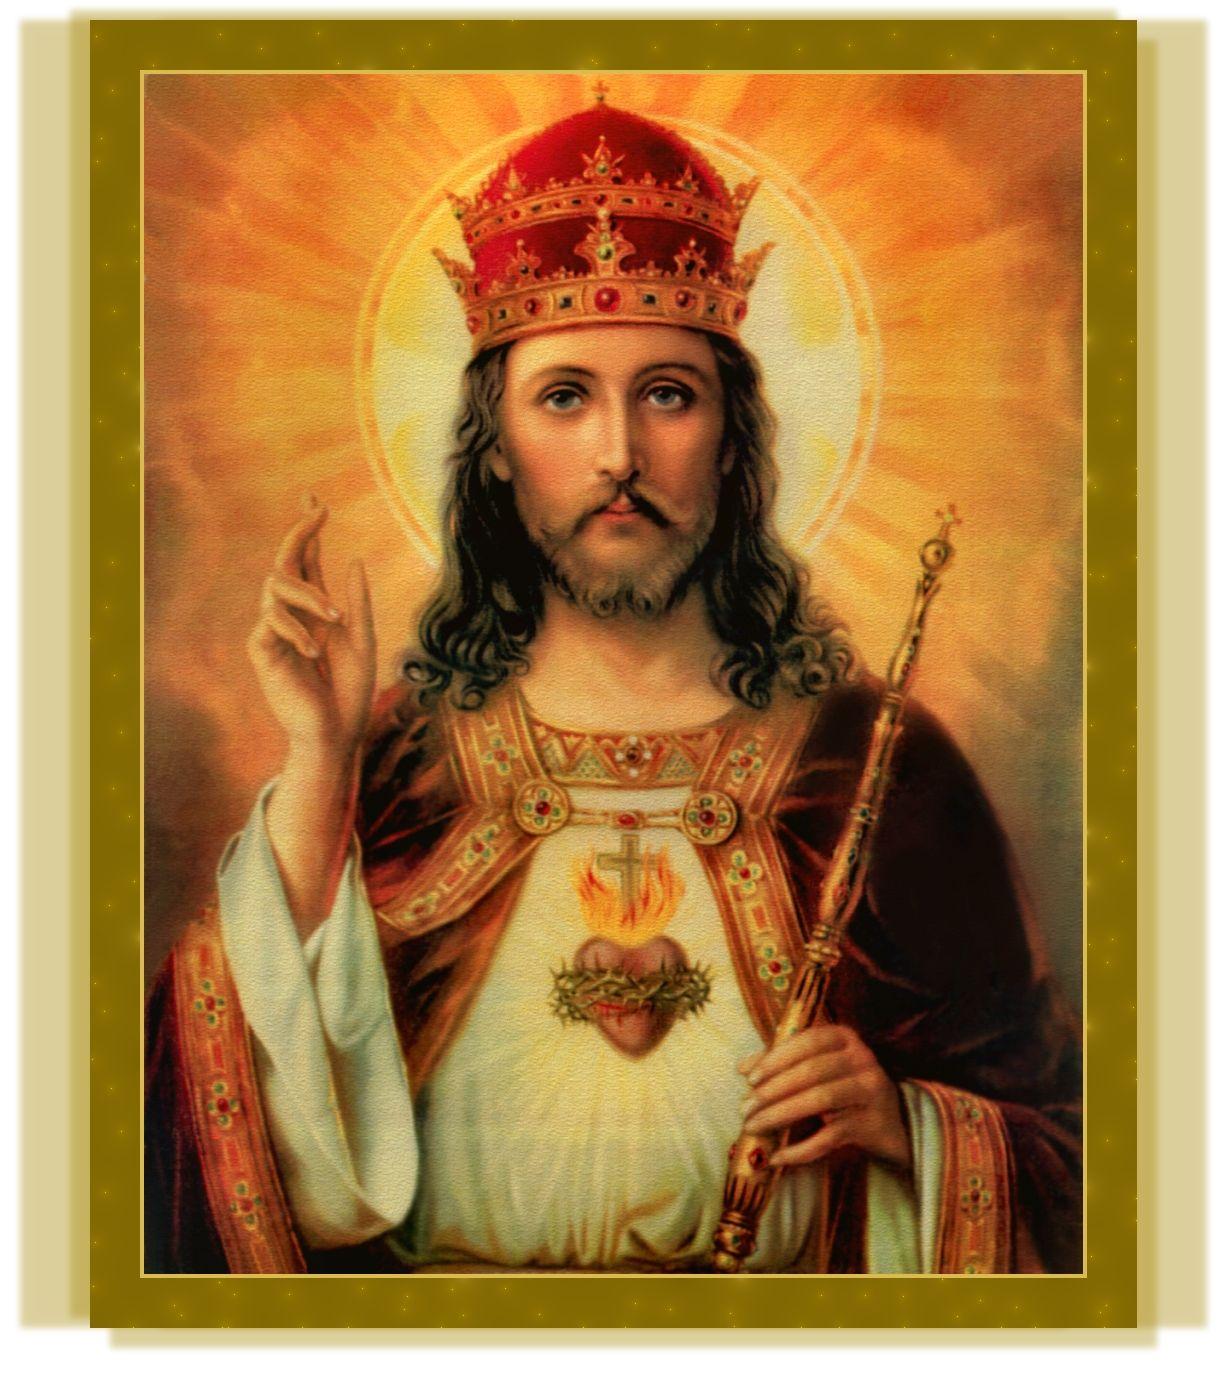 FEAST OF CHRIST THE KING